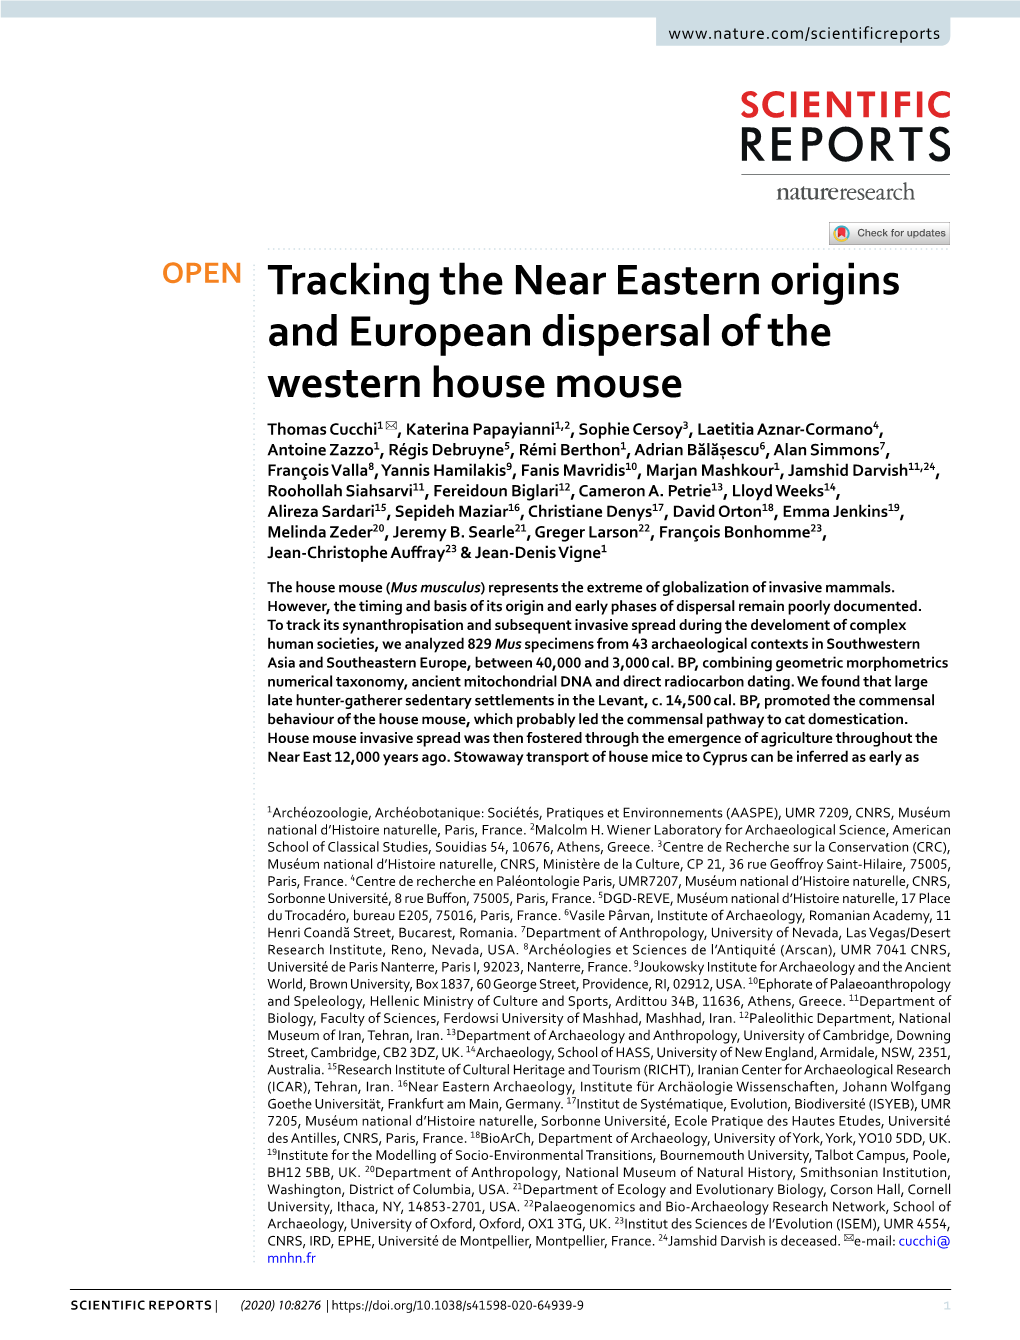 Tracking the Near Eastern Origins and European Dispersal Of